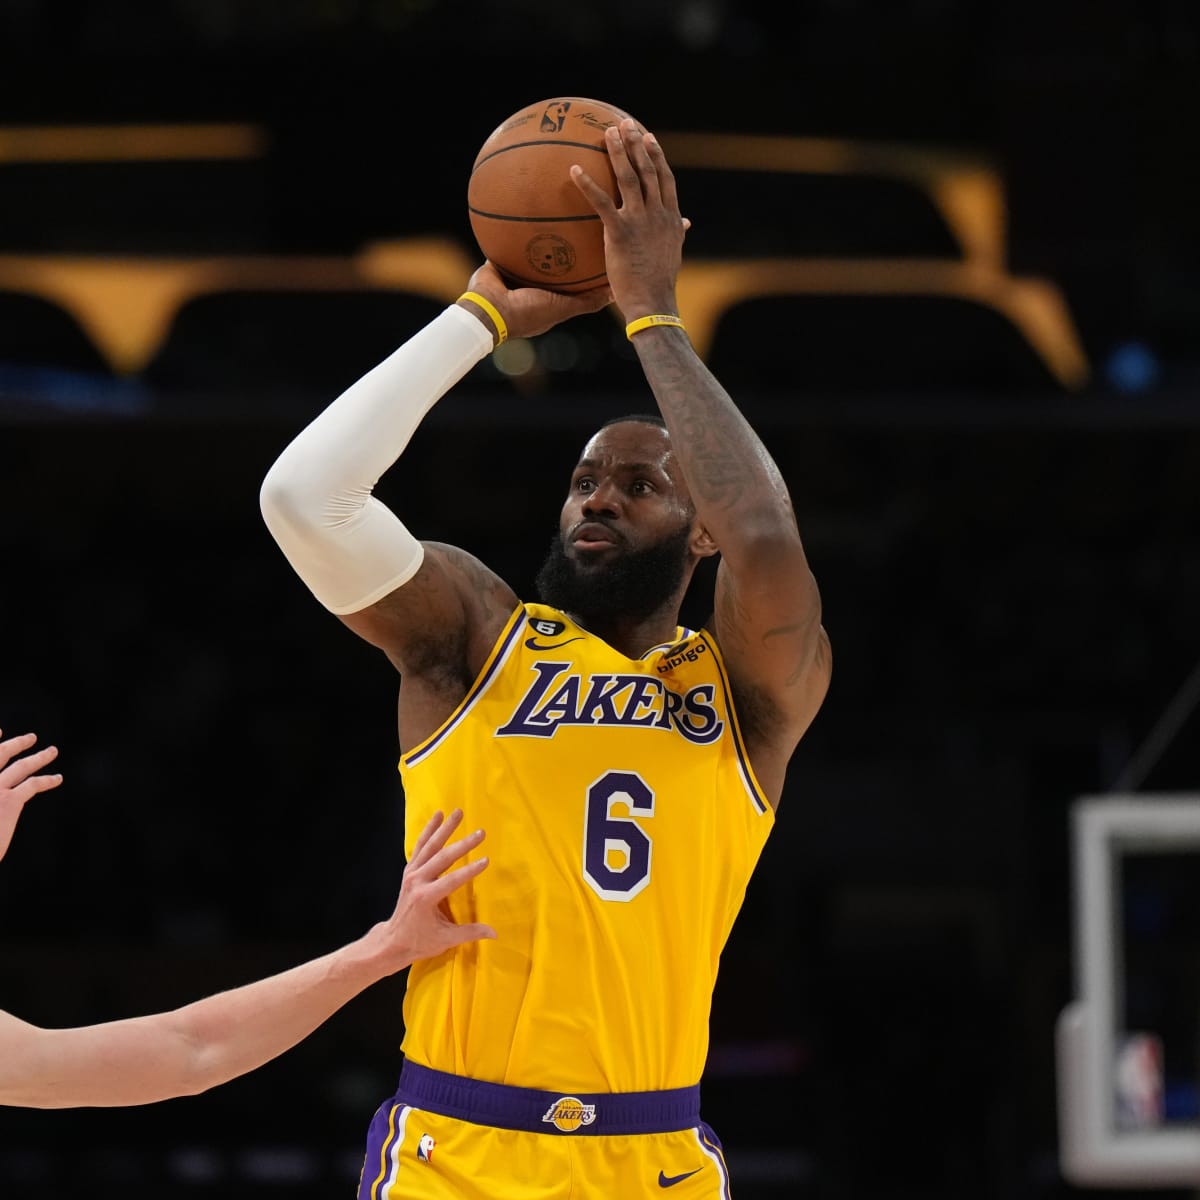 Warriors vs. Lakers: Start time, where to watch, what's the latest